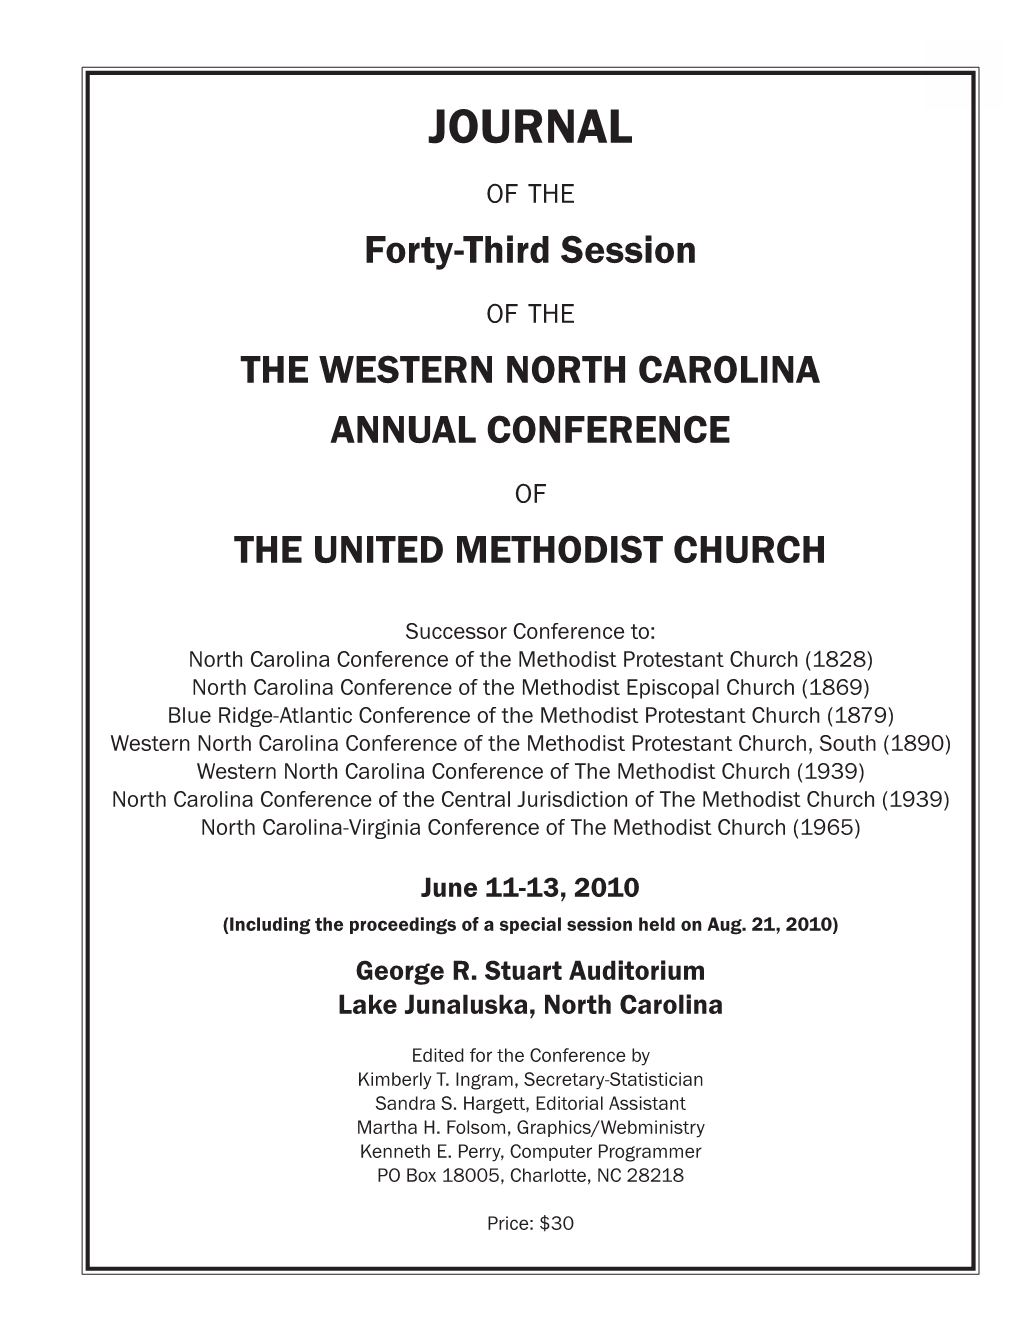 Journal 1 JOURNAL of the Forty-Third Session of the the WESTERN NORTH CAROLINA ANNUAL CONFERENCE